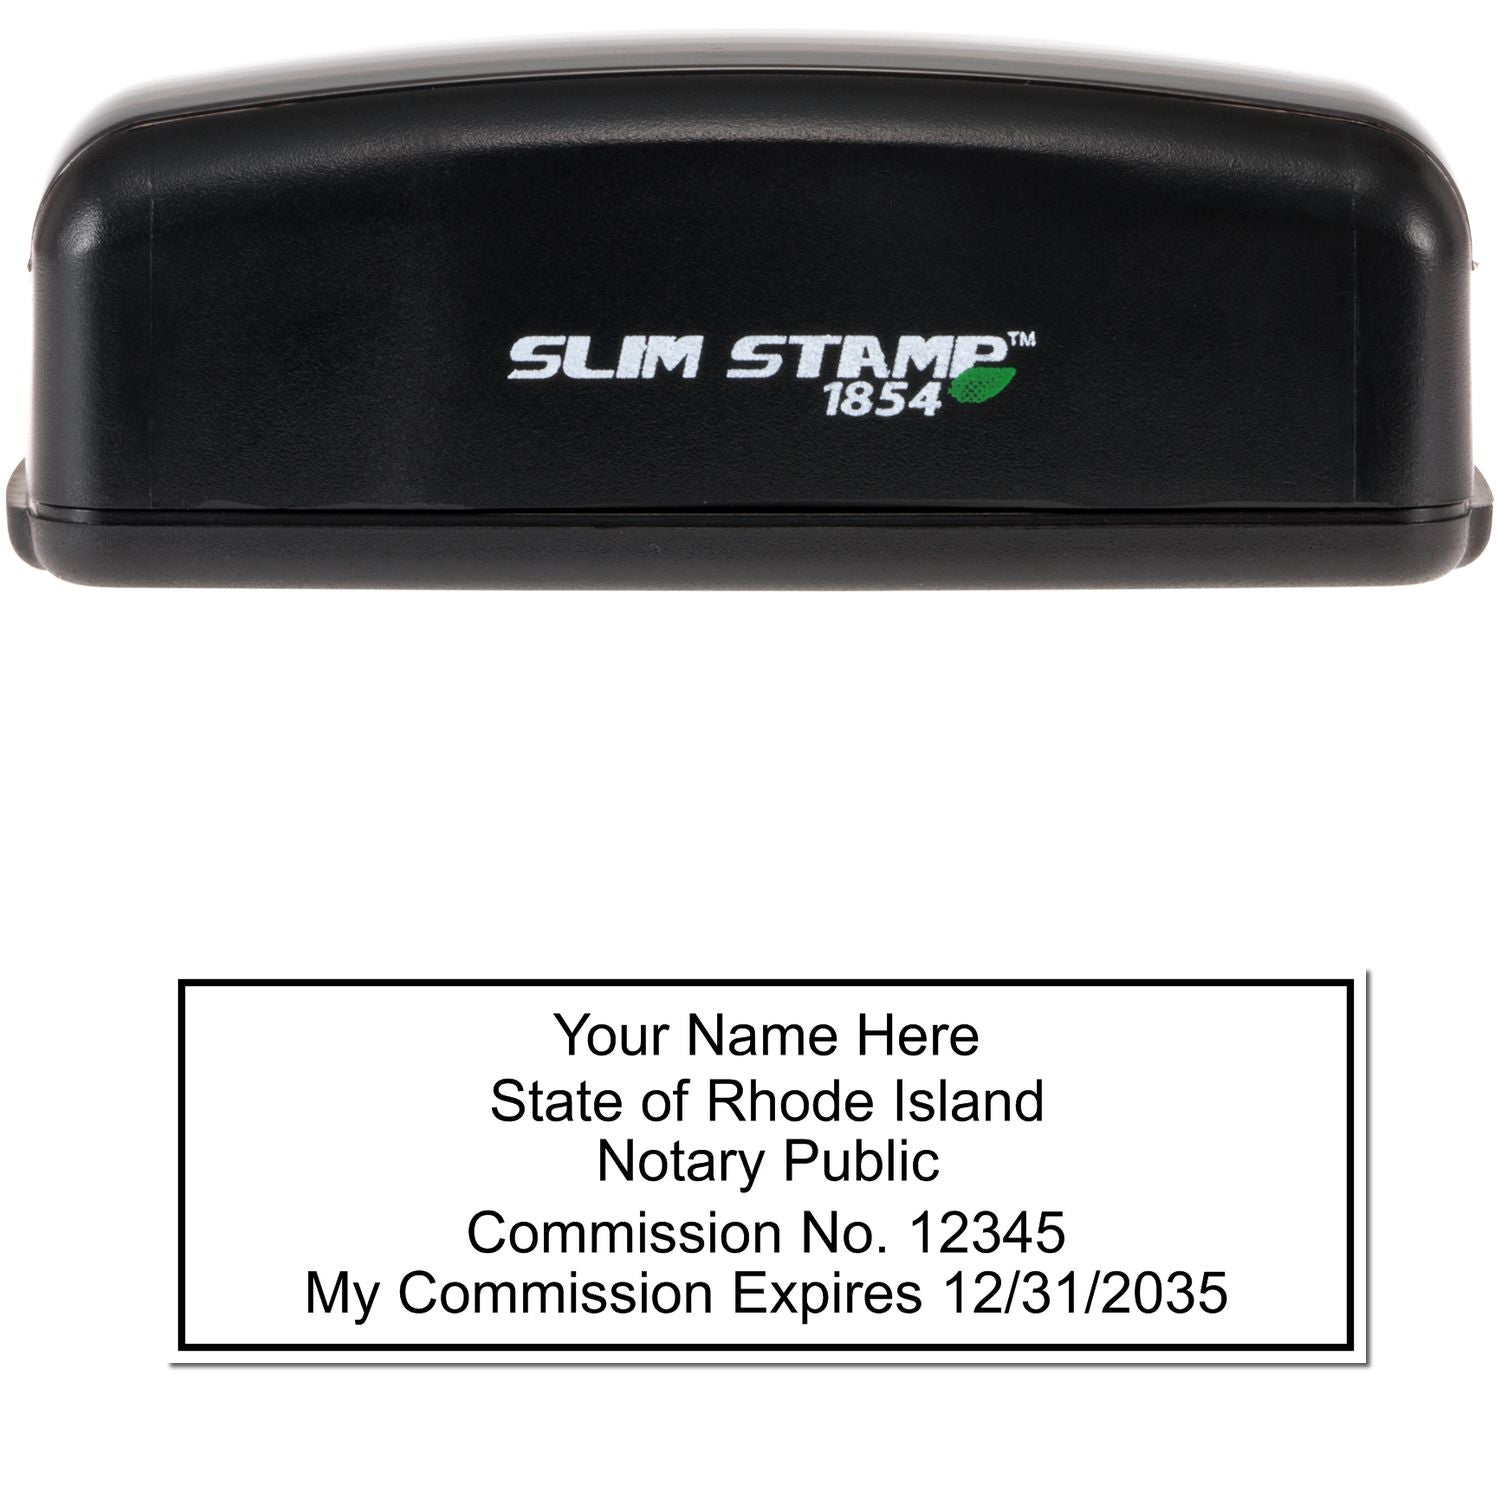 The main image for the Slim Pre-Inked Rectangular Notary Stamp for Rhode Island depicting a sample of the imprint and electronic files